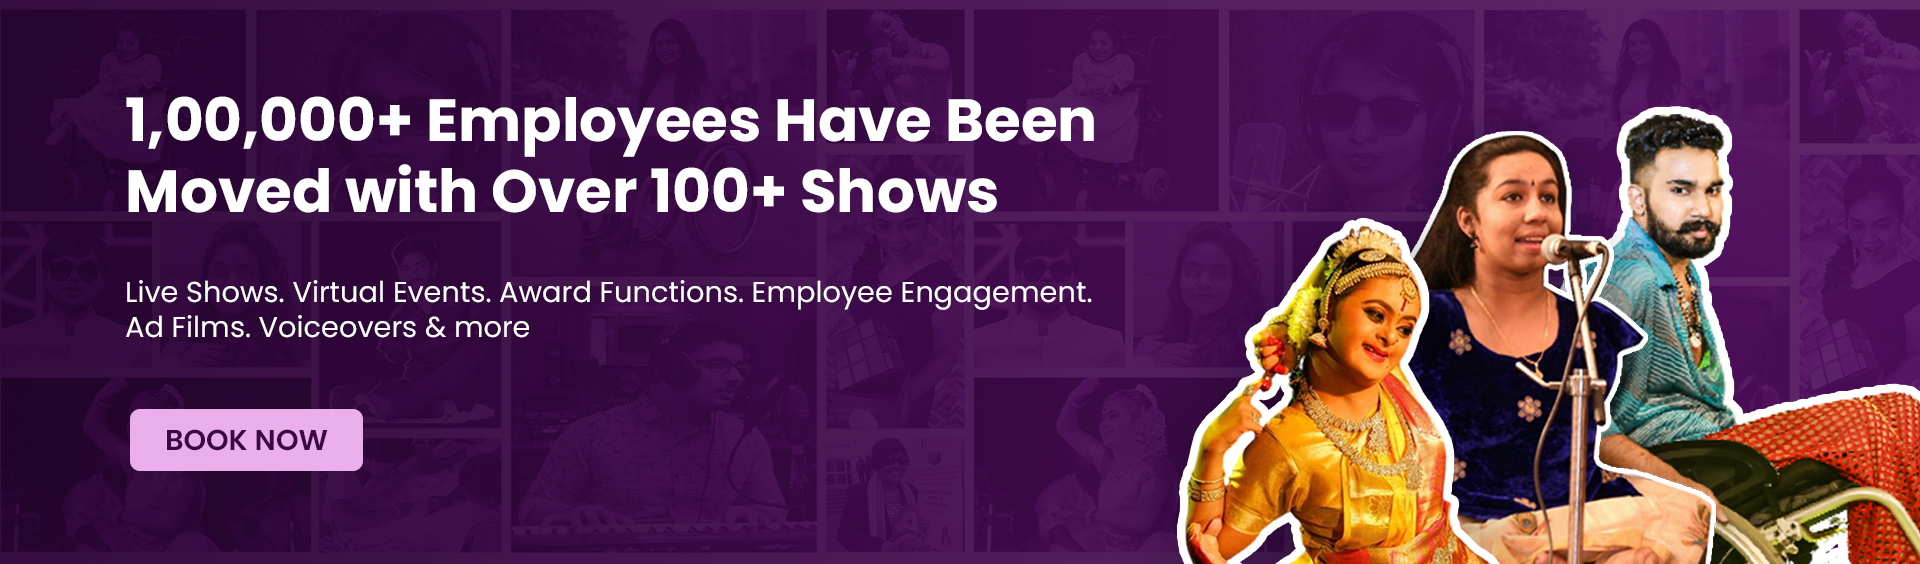 1,00,000+ Employees have been moved with over 100+ shows. Live Show, Virtual Events, Award Functions, Employee Engagement, Ad Films, Voiceovers & more 